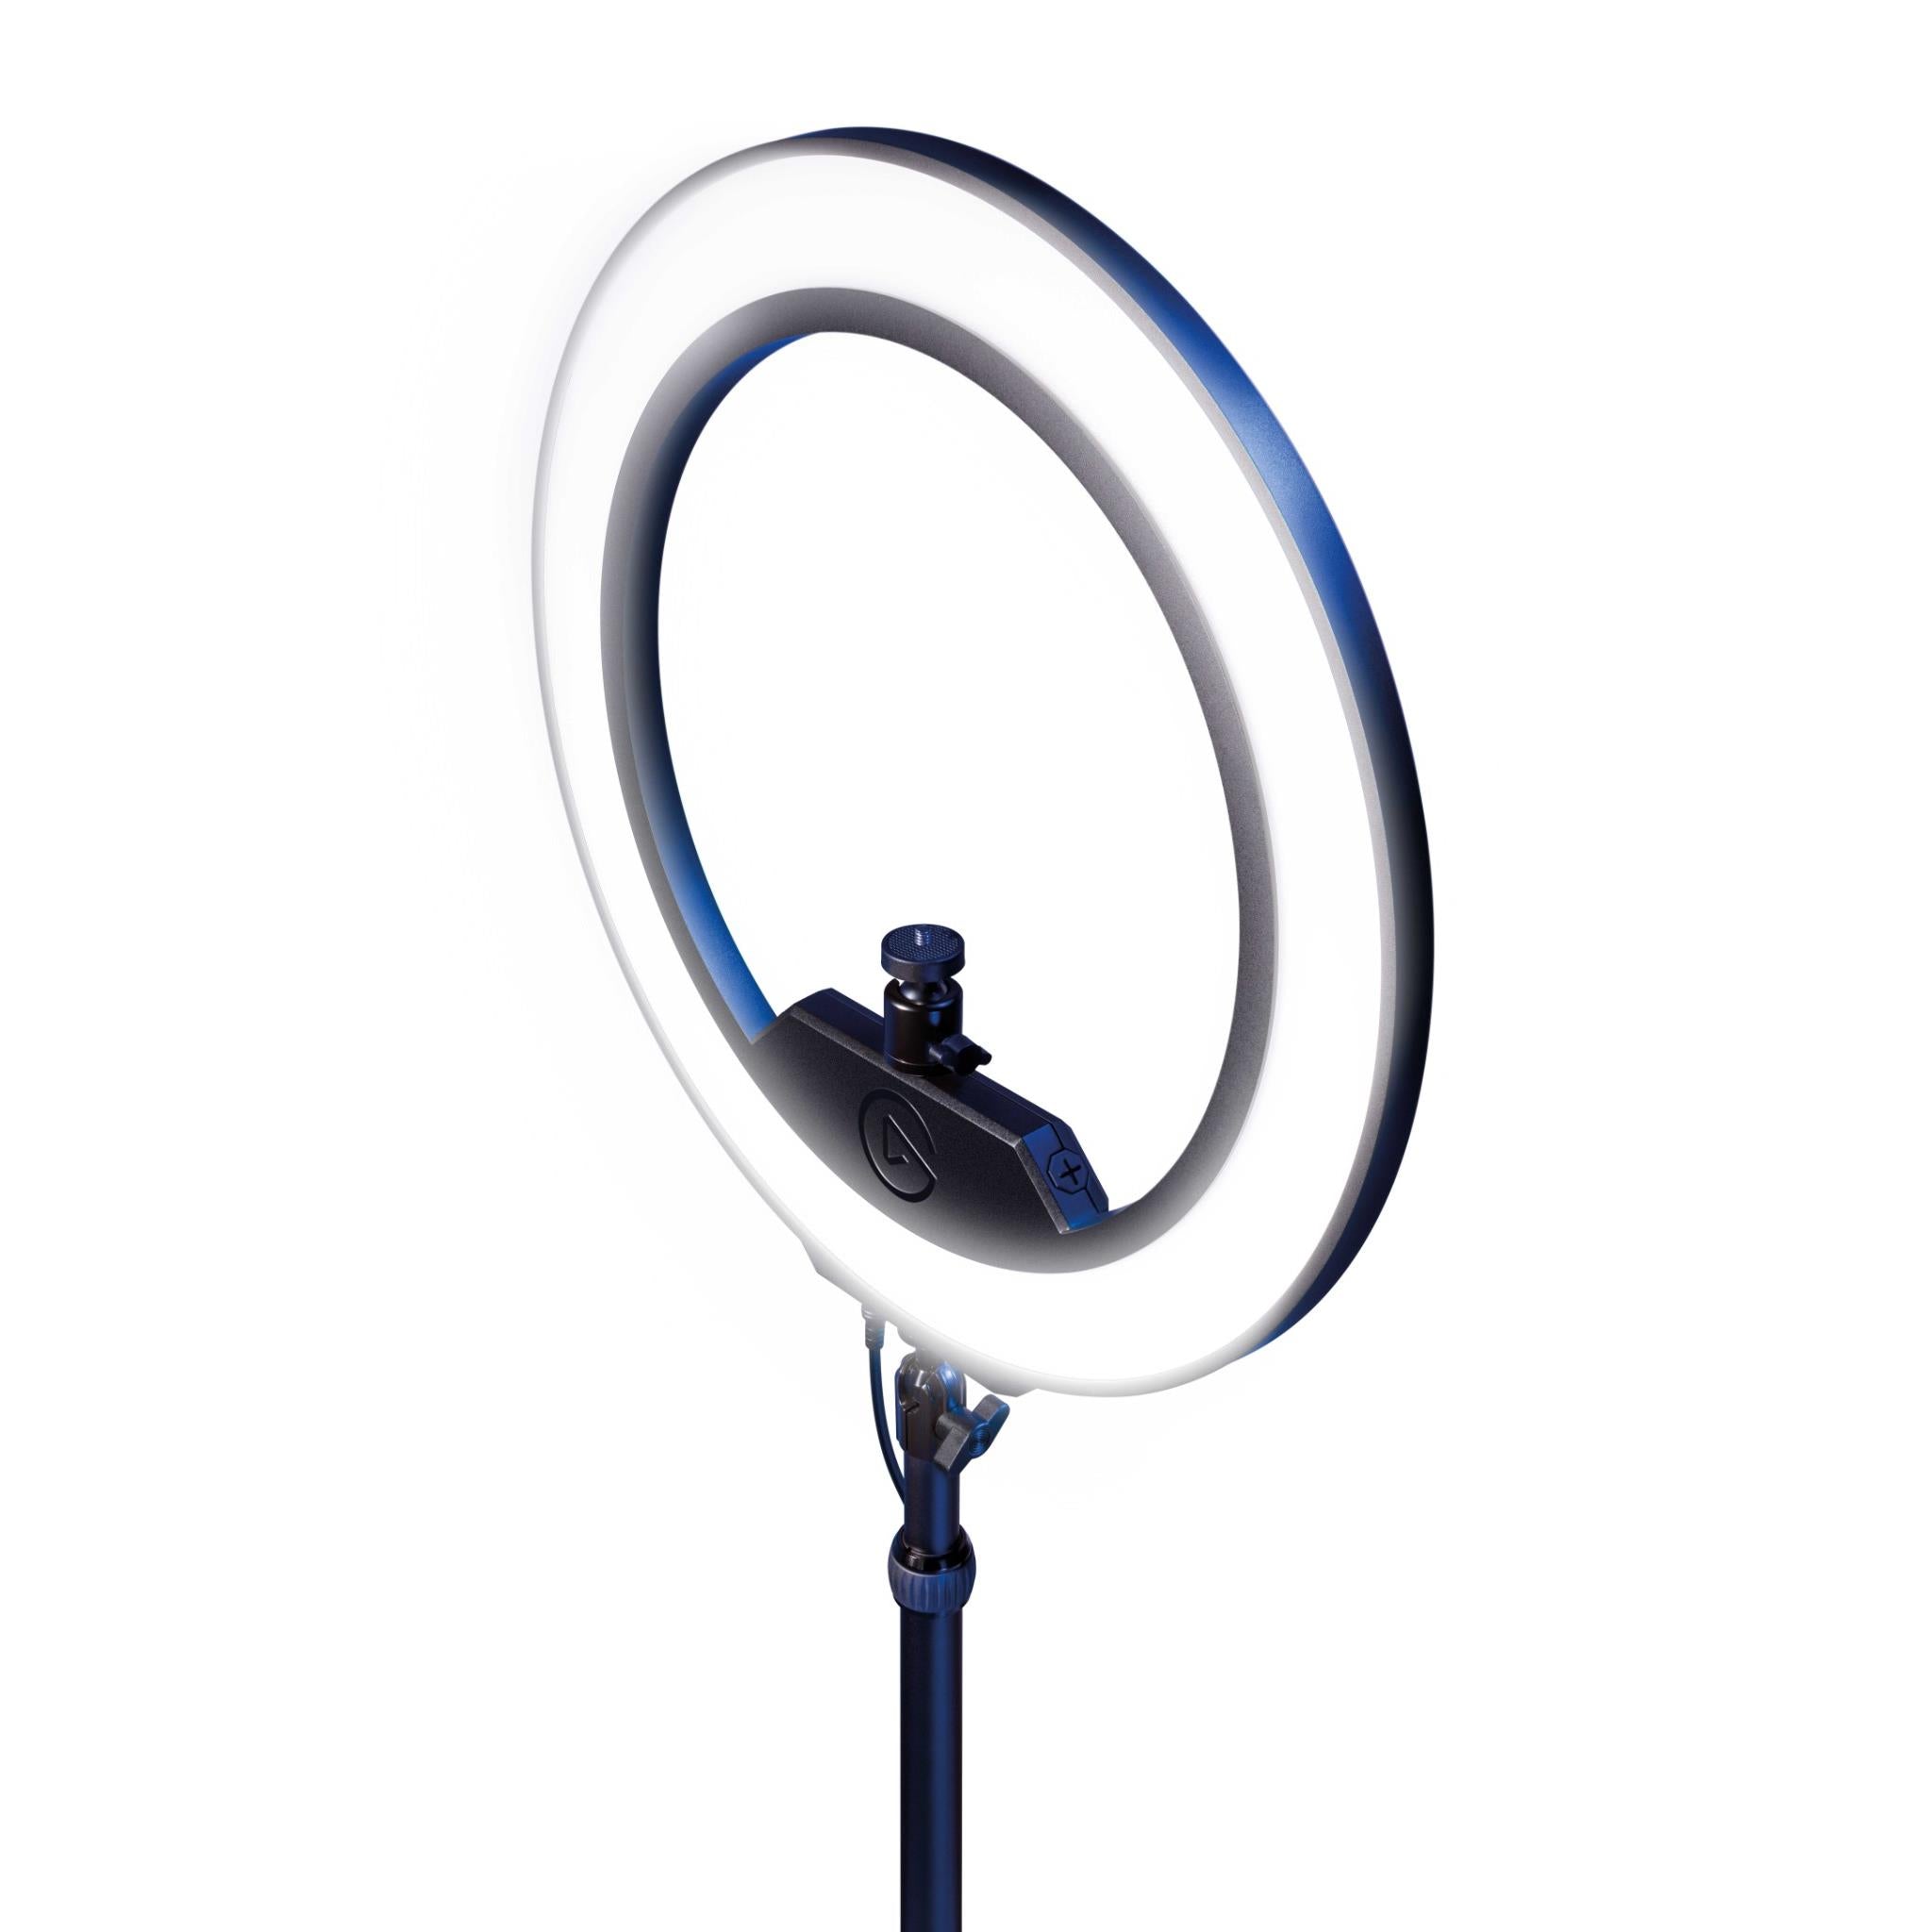 Ring Light 18 Inch Price is Best | 45CM Ring Light With Stand